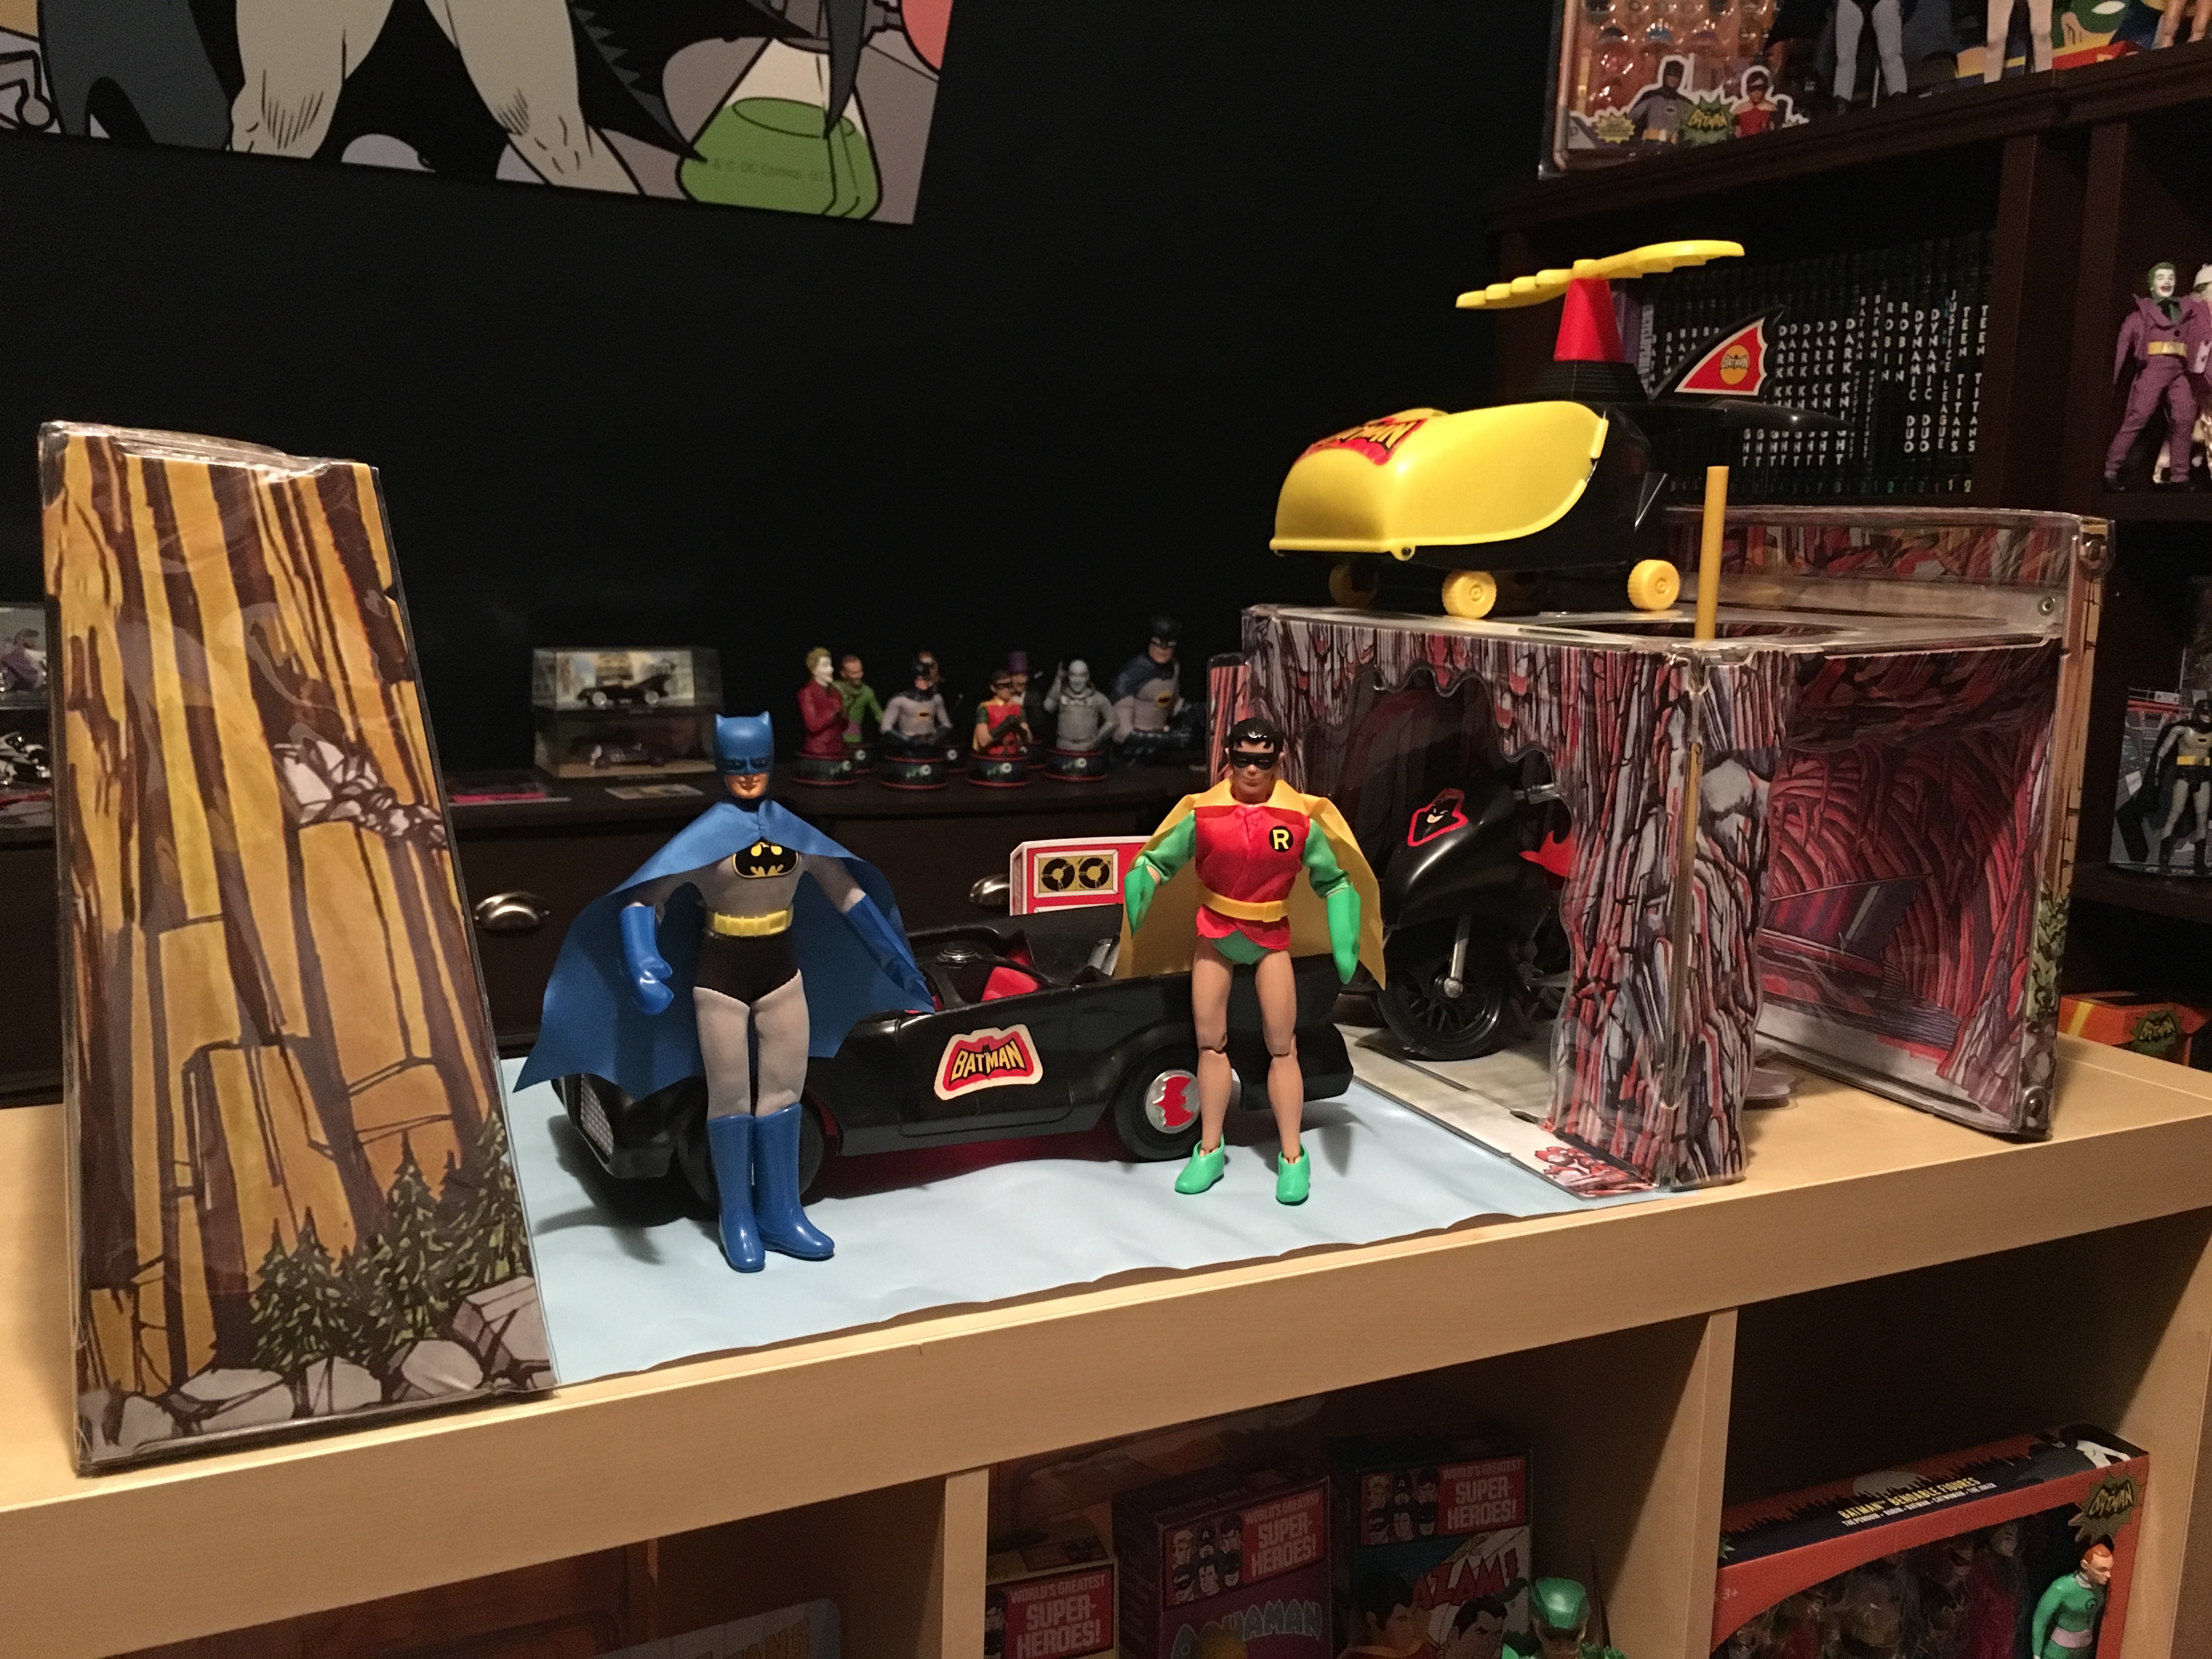 A glimpse of my own collection, the centerpiece of which is Mego and Figures Toy Company Batman and Robin